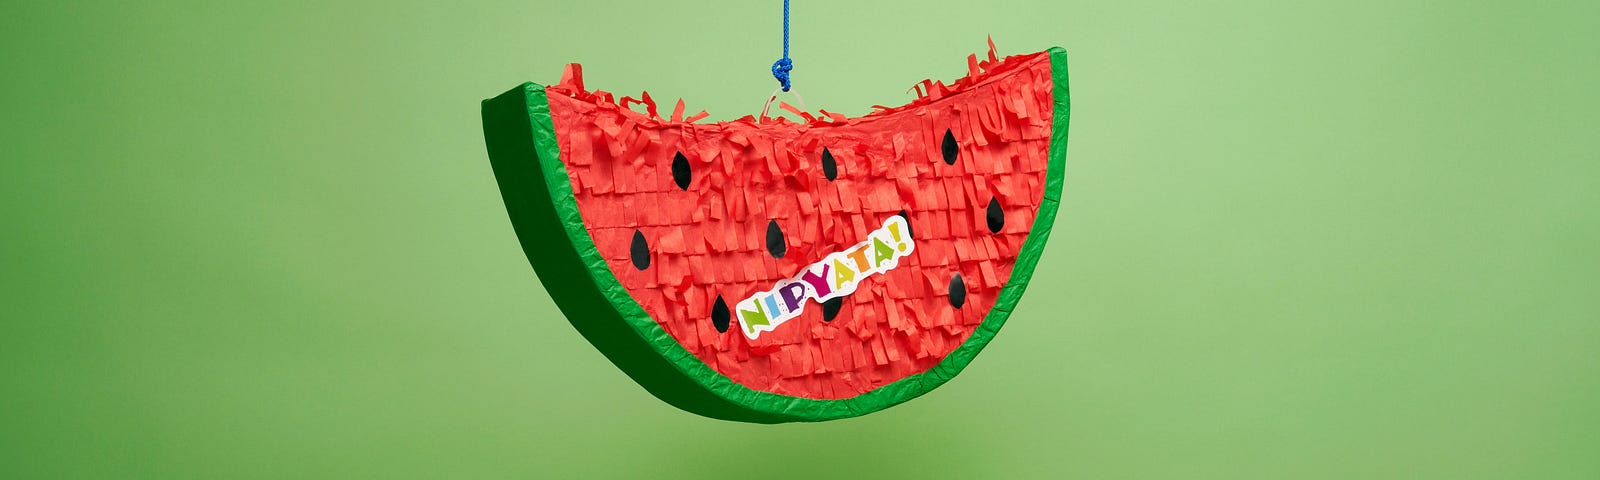 watermelon pinata with alcoholic drinks inside